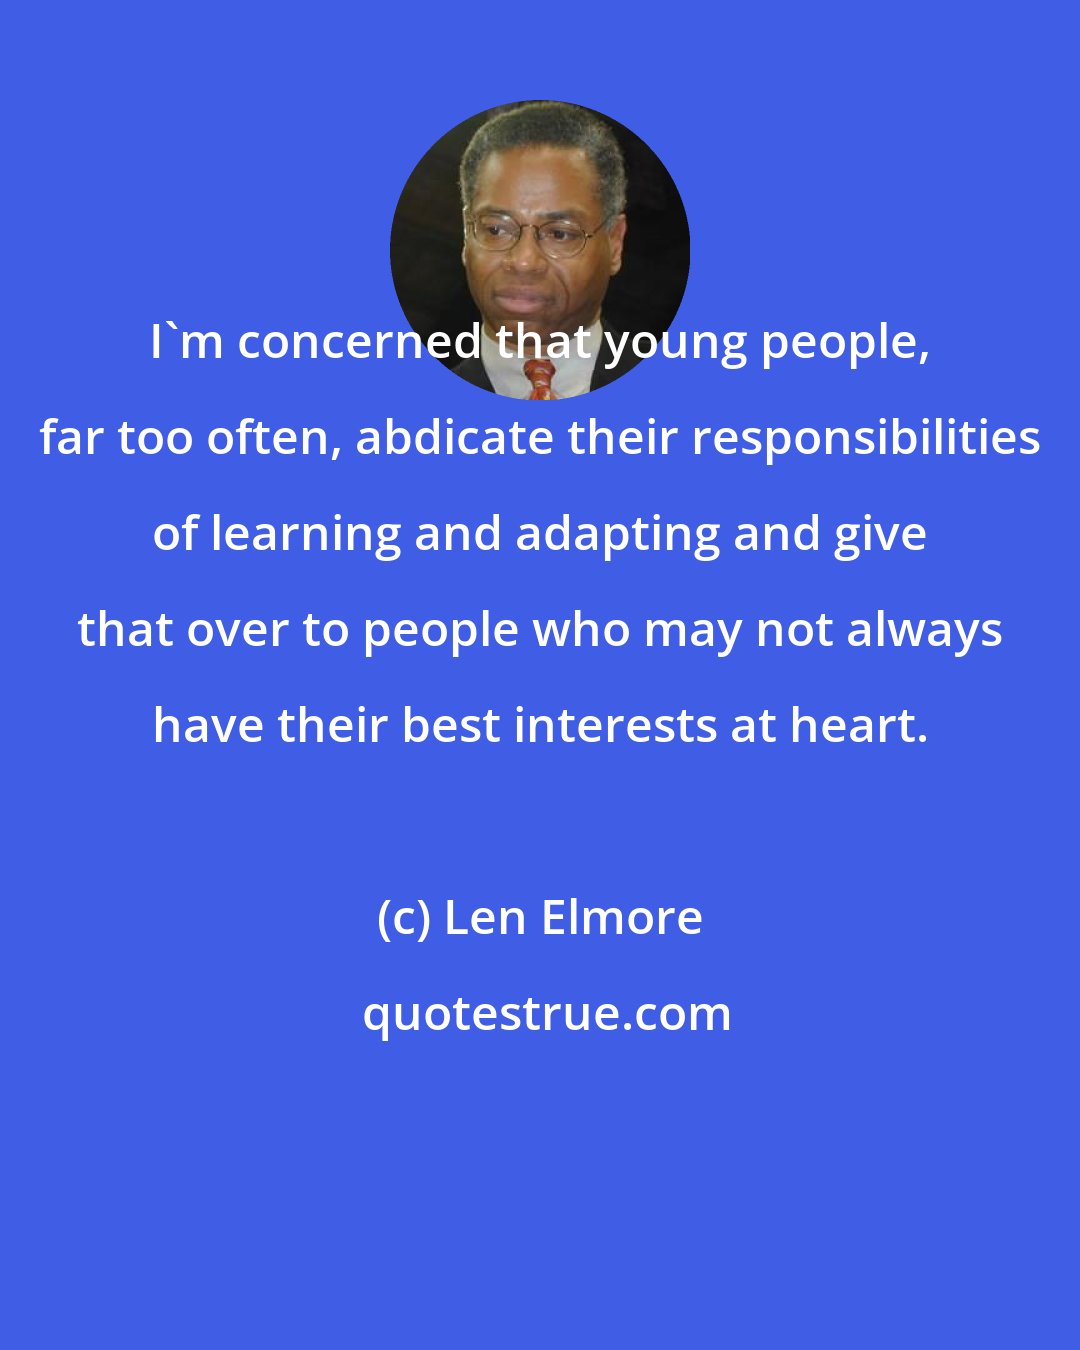 Len Elmore: I'm concerned that young people, far too often, abdicate their responsibilities of learning and adapting and give that over to people who may not always have their best interests at heart.